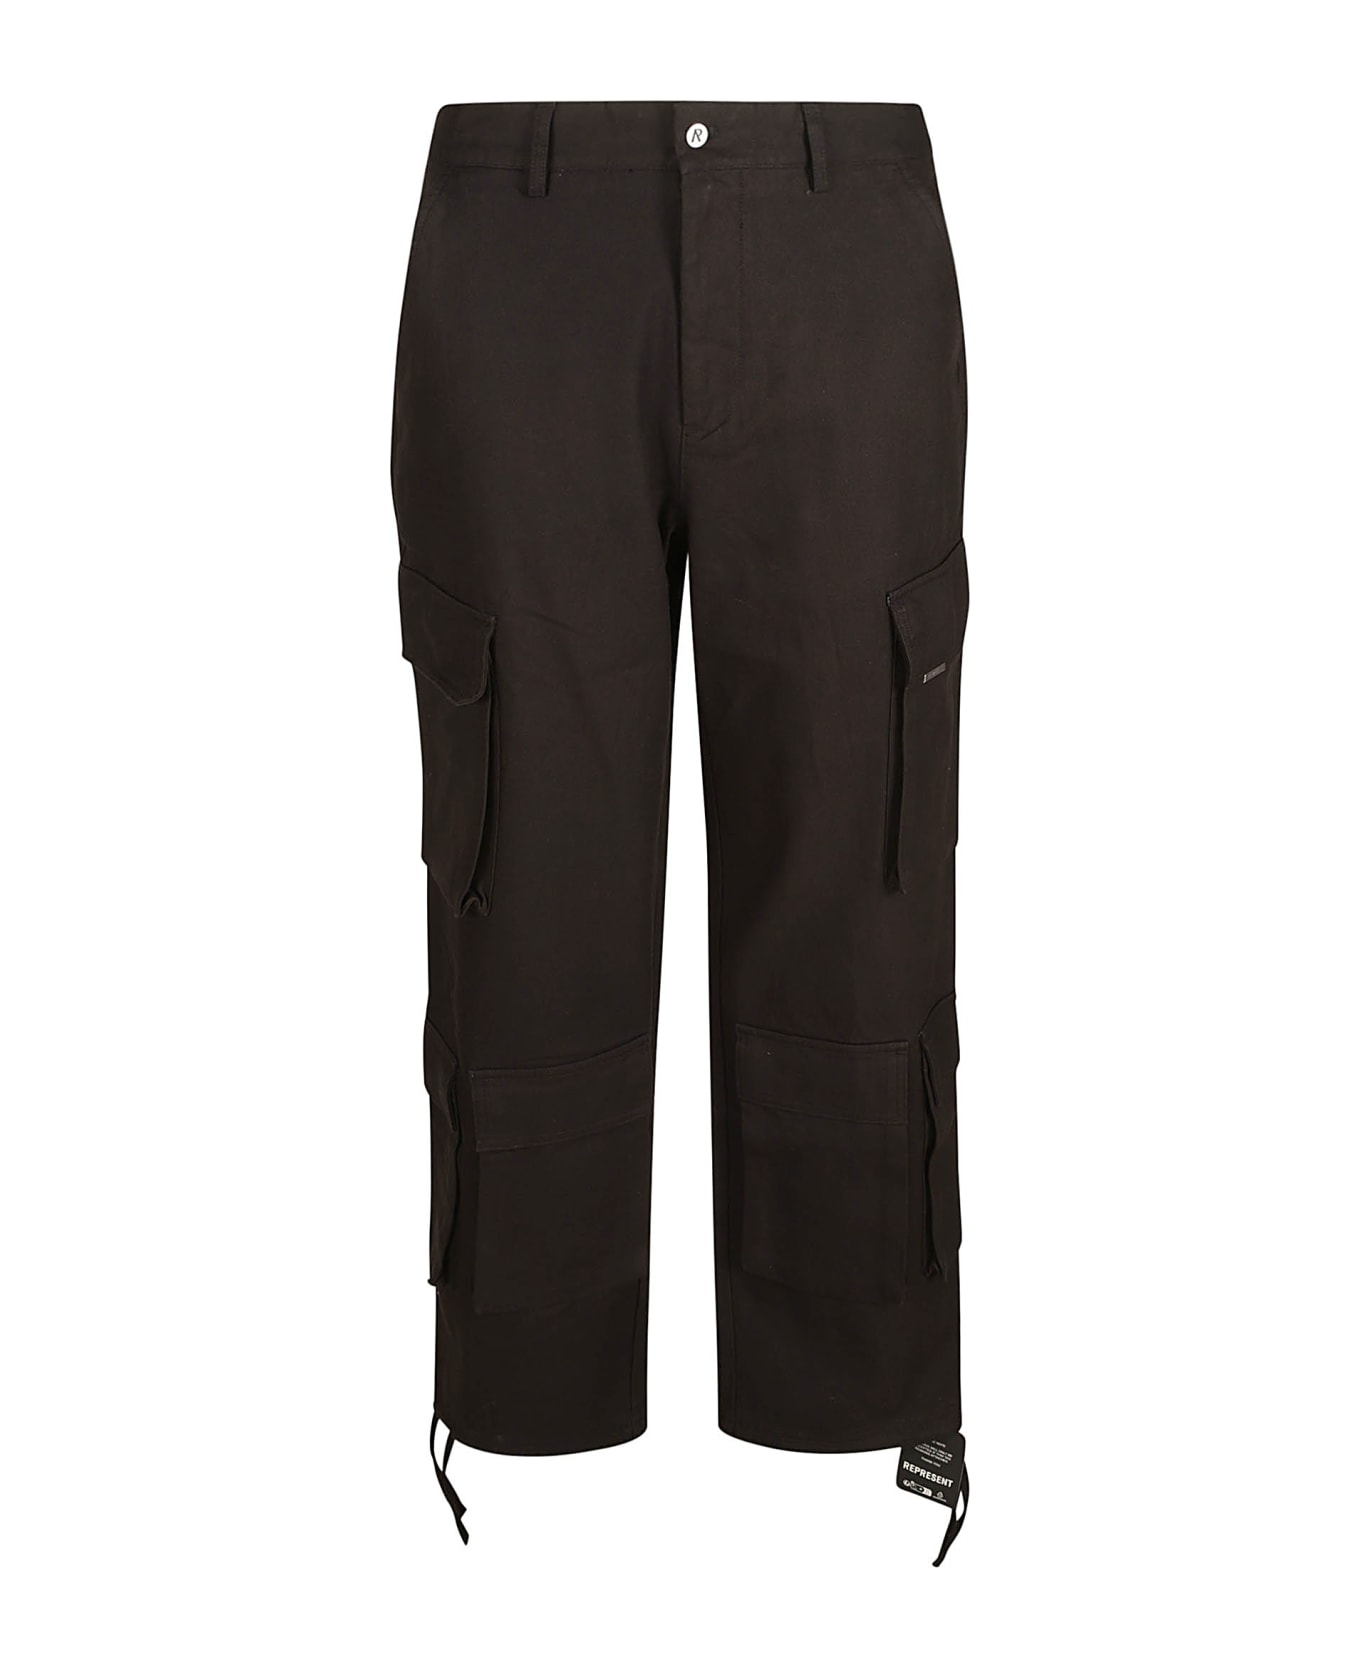 REPRESENT Baggy Cargo Trousers - Black ボトムス